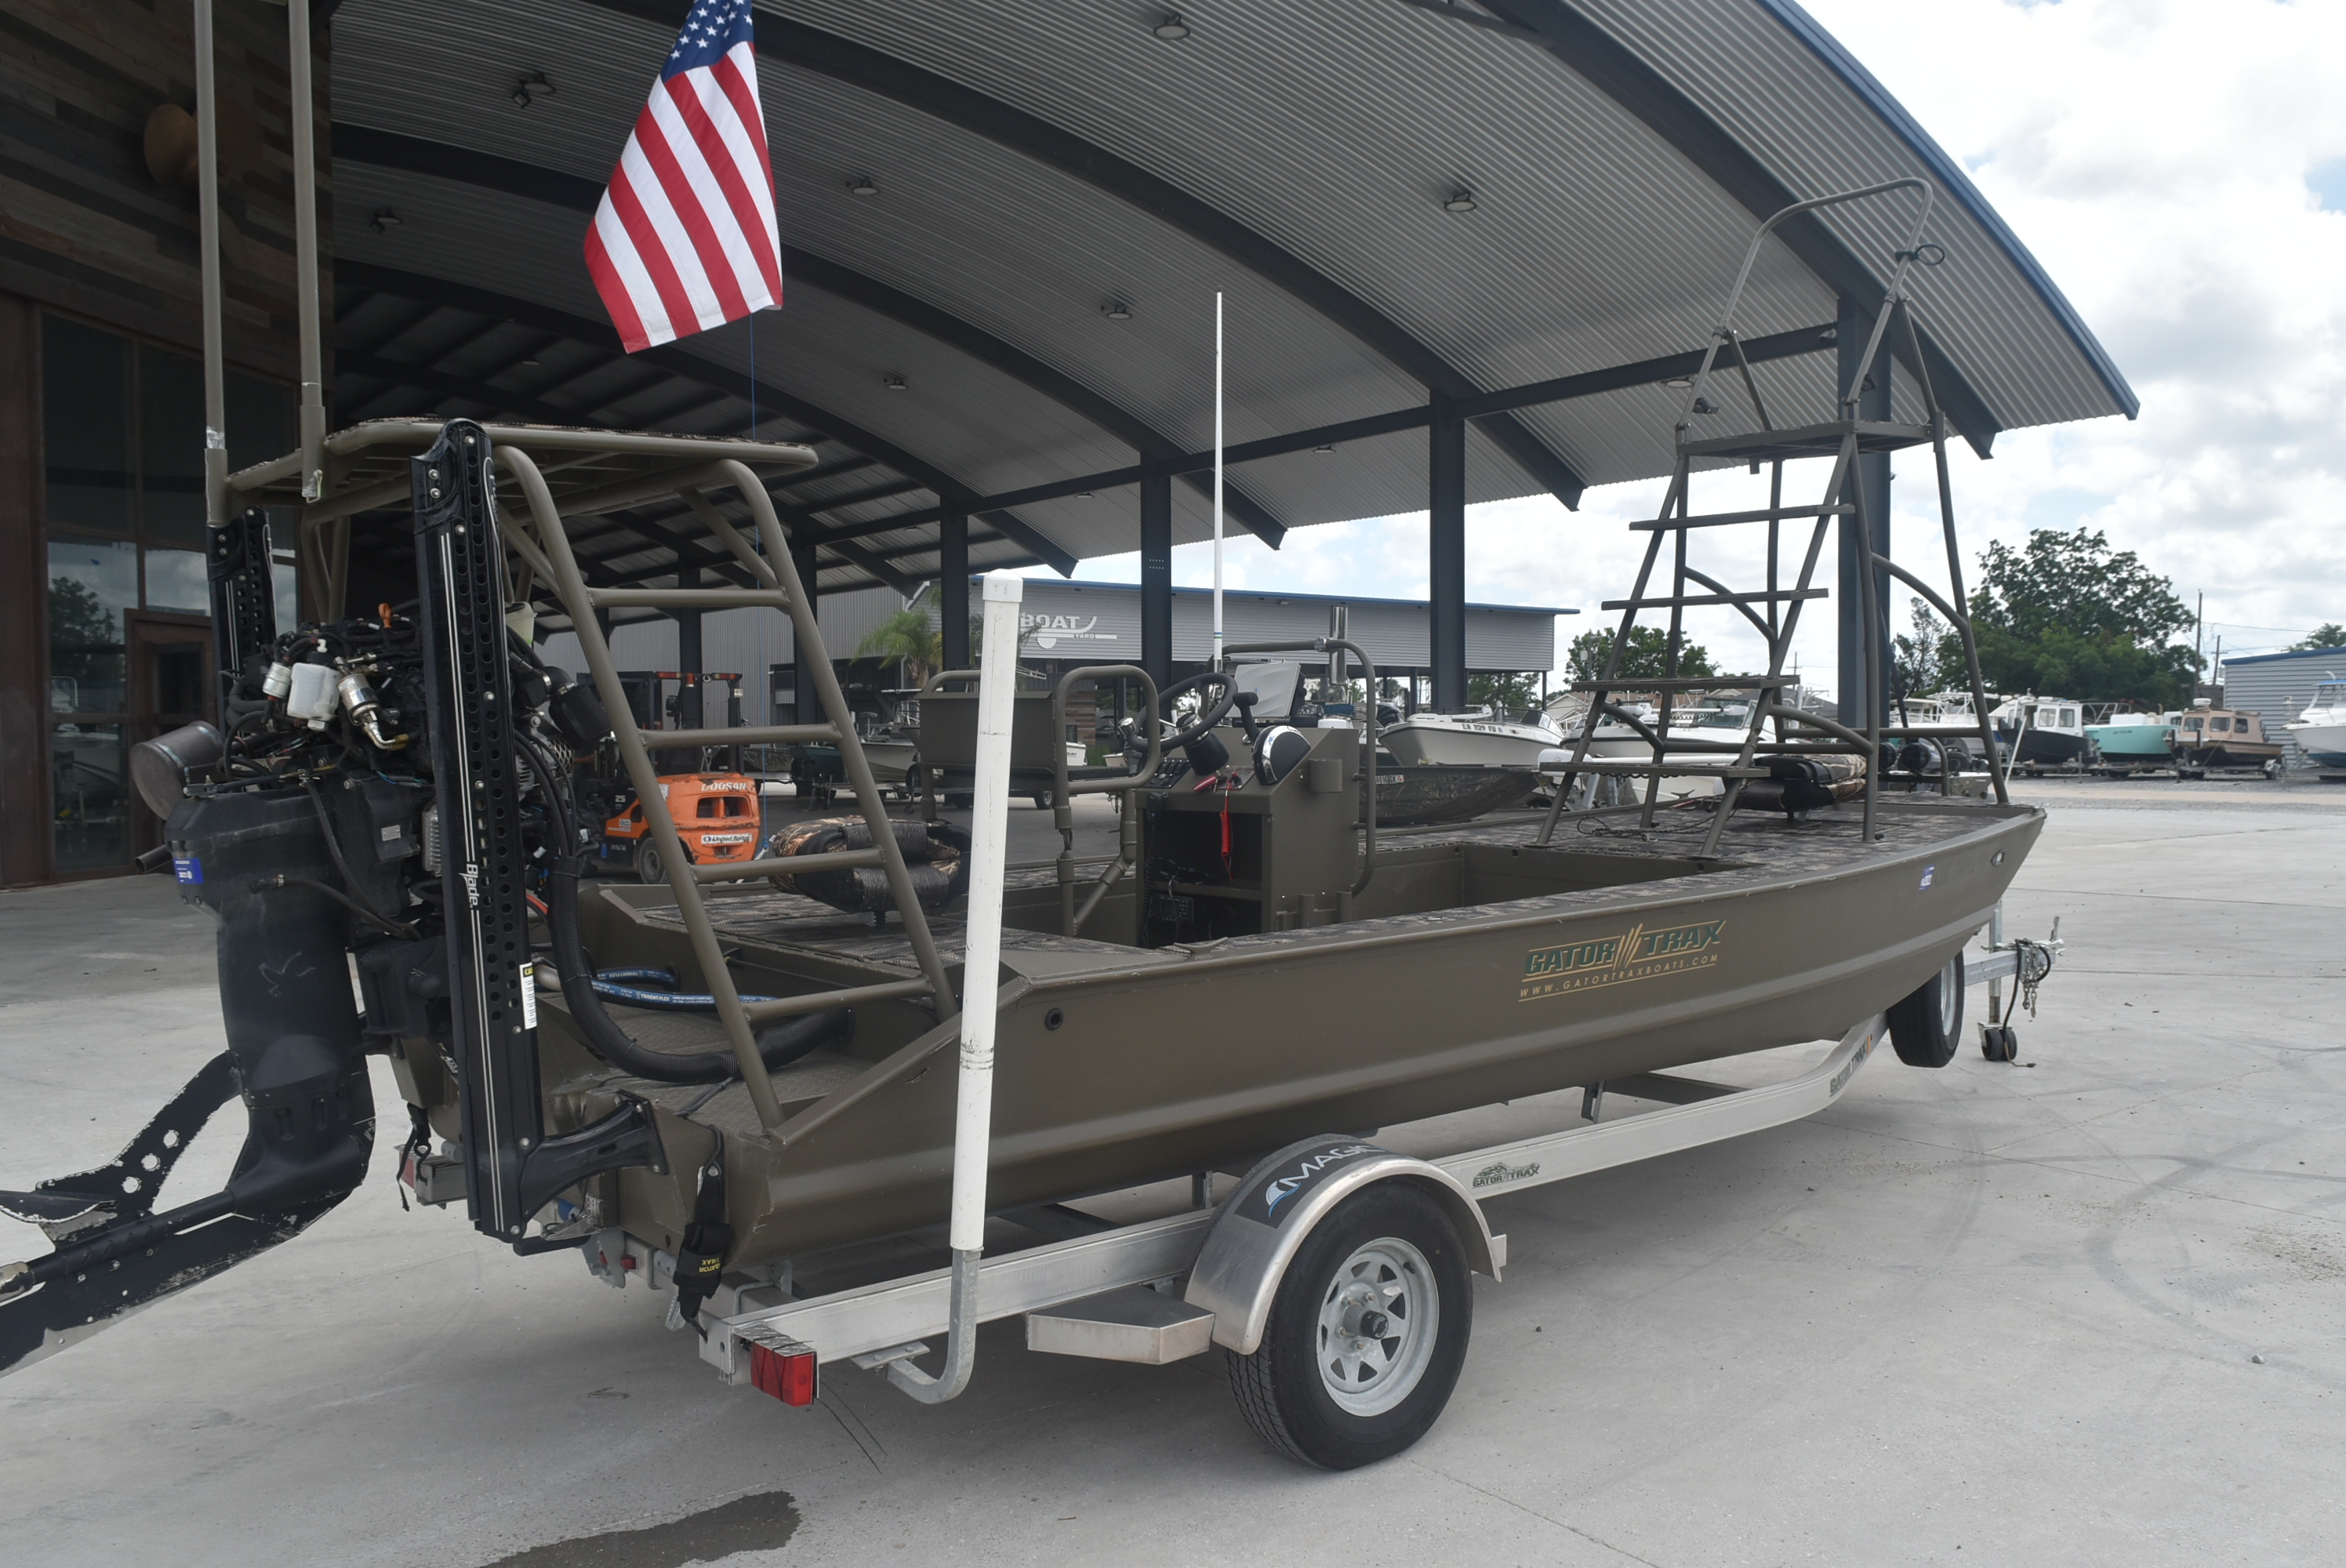 2019 GATORTRAX boat for sale, model of the boat is 1962 & Image # 7 of 9